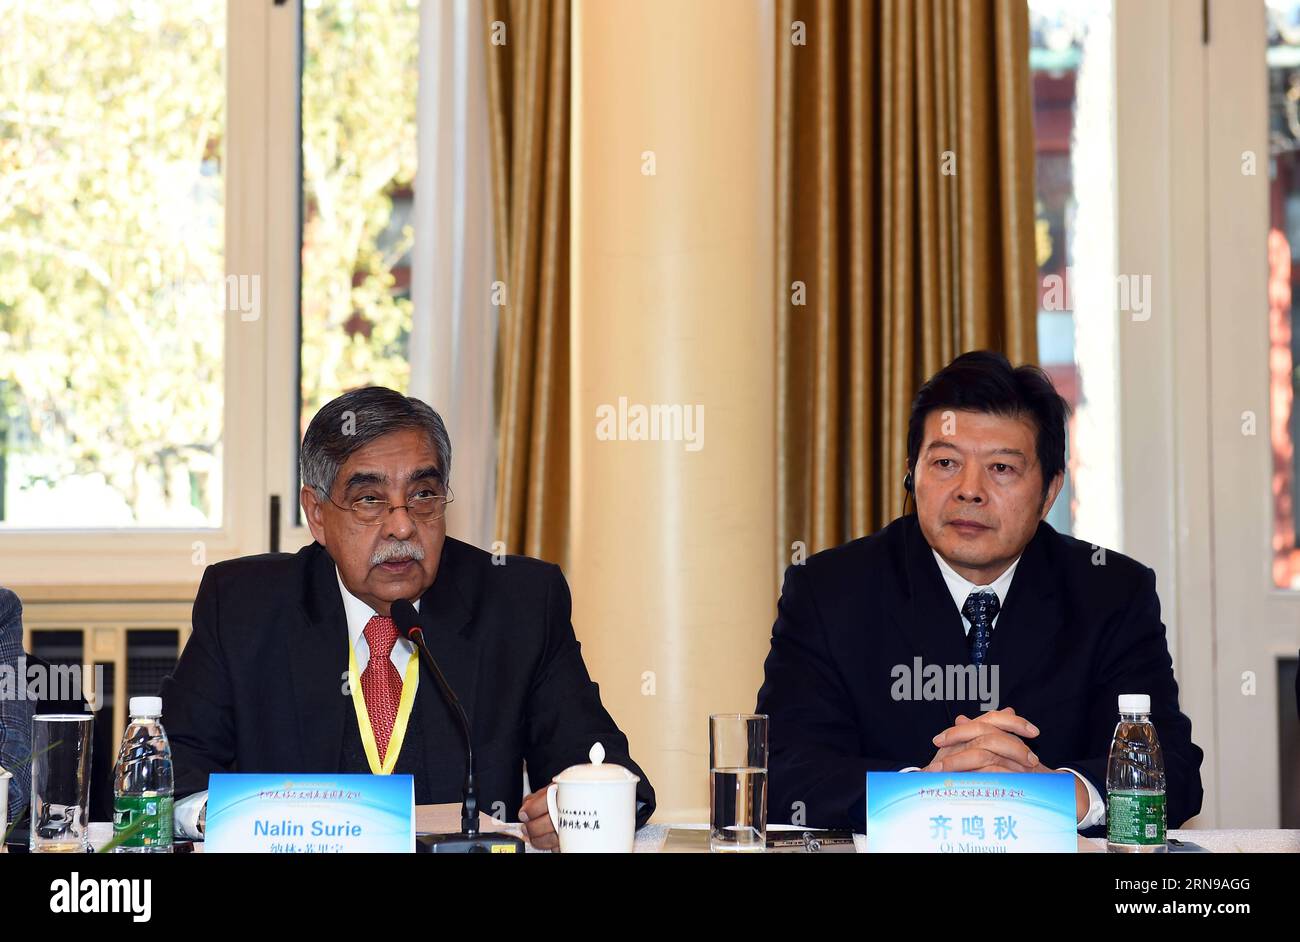 Nalin Surie (L), director general of the Indian Council of World Affairs, and Qi Mingqiu, vice chairperson of China Soong Ching Ling Foundation, attend the China-India Friendship and Inter-Civilization Exchanges Roundtable Conference in Beijing, capital of China, Nov. 26, 2015. The conference was held to mark the 65th anniversary of the establishment of the diplomatic relations between China and India. ) (ry) CHINA-NDIA-ROUNDTABLE CONFERENCE (CN) JinxLiangkuai PUBLICATIONxNOTxINxCHN   Nalin Surie l Director General of The Indian Council of World Affairs and Qi Mingqiu Vice Chair person of Chin Stock Photo